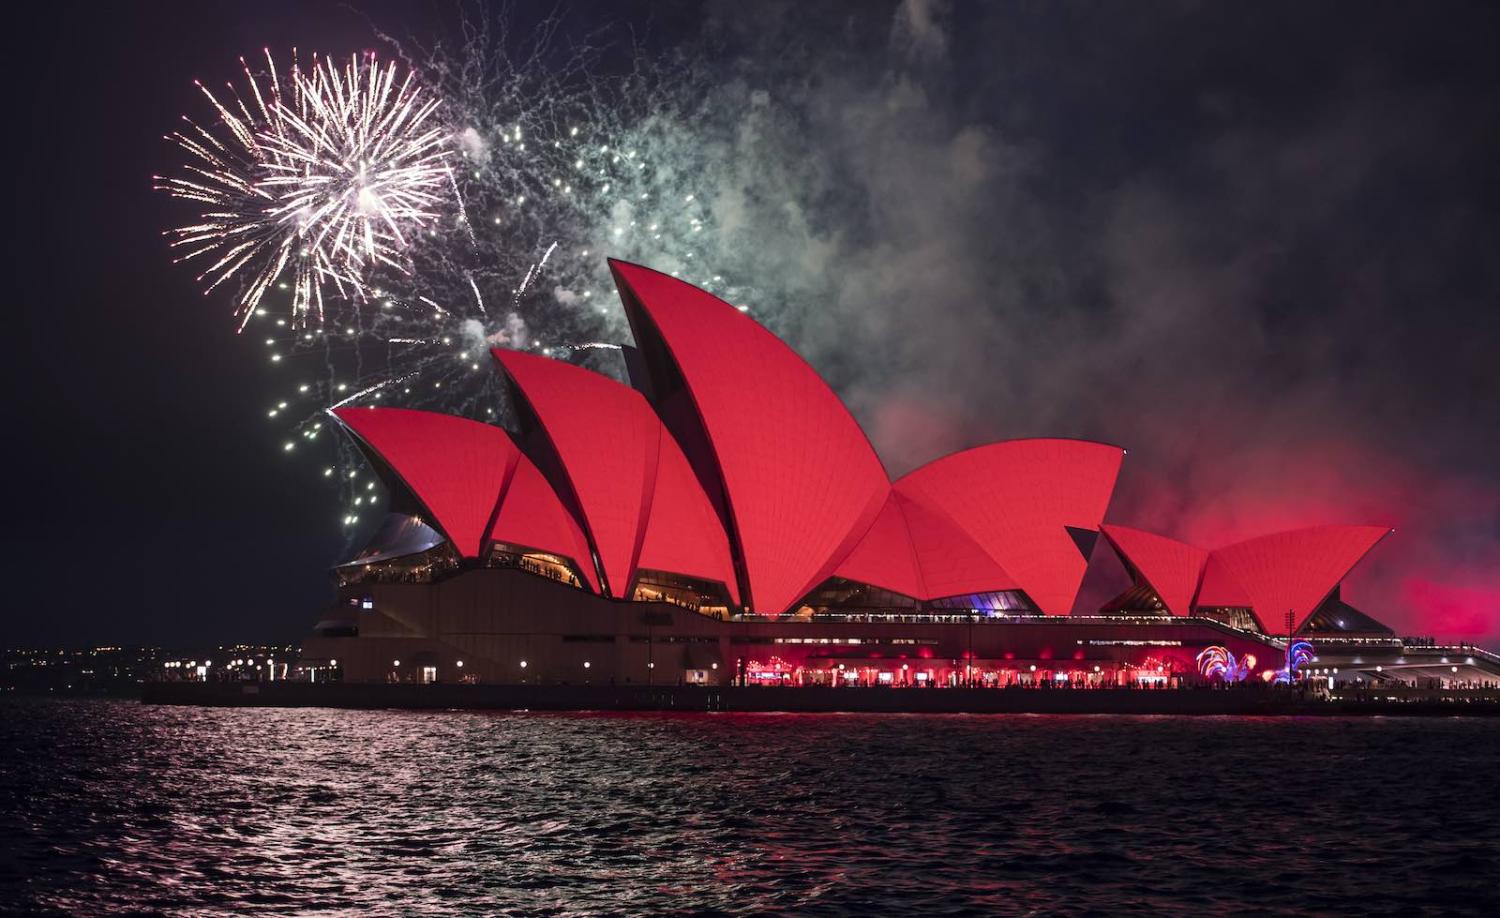 Lunar New Year celebrations on Sydney Harbour, January 2017 (James D. Morgan/Getty Images)